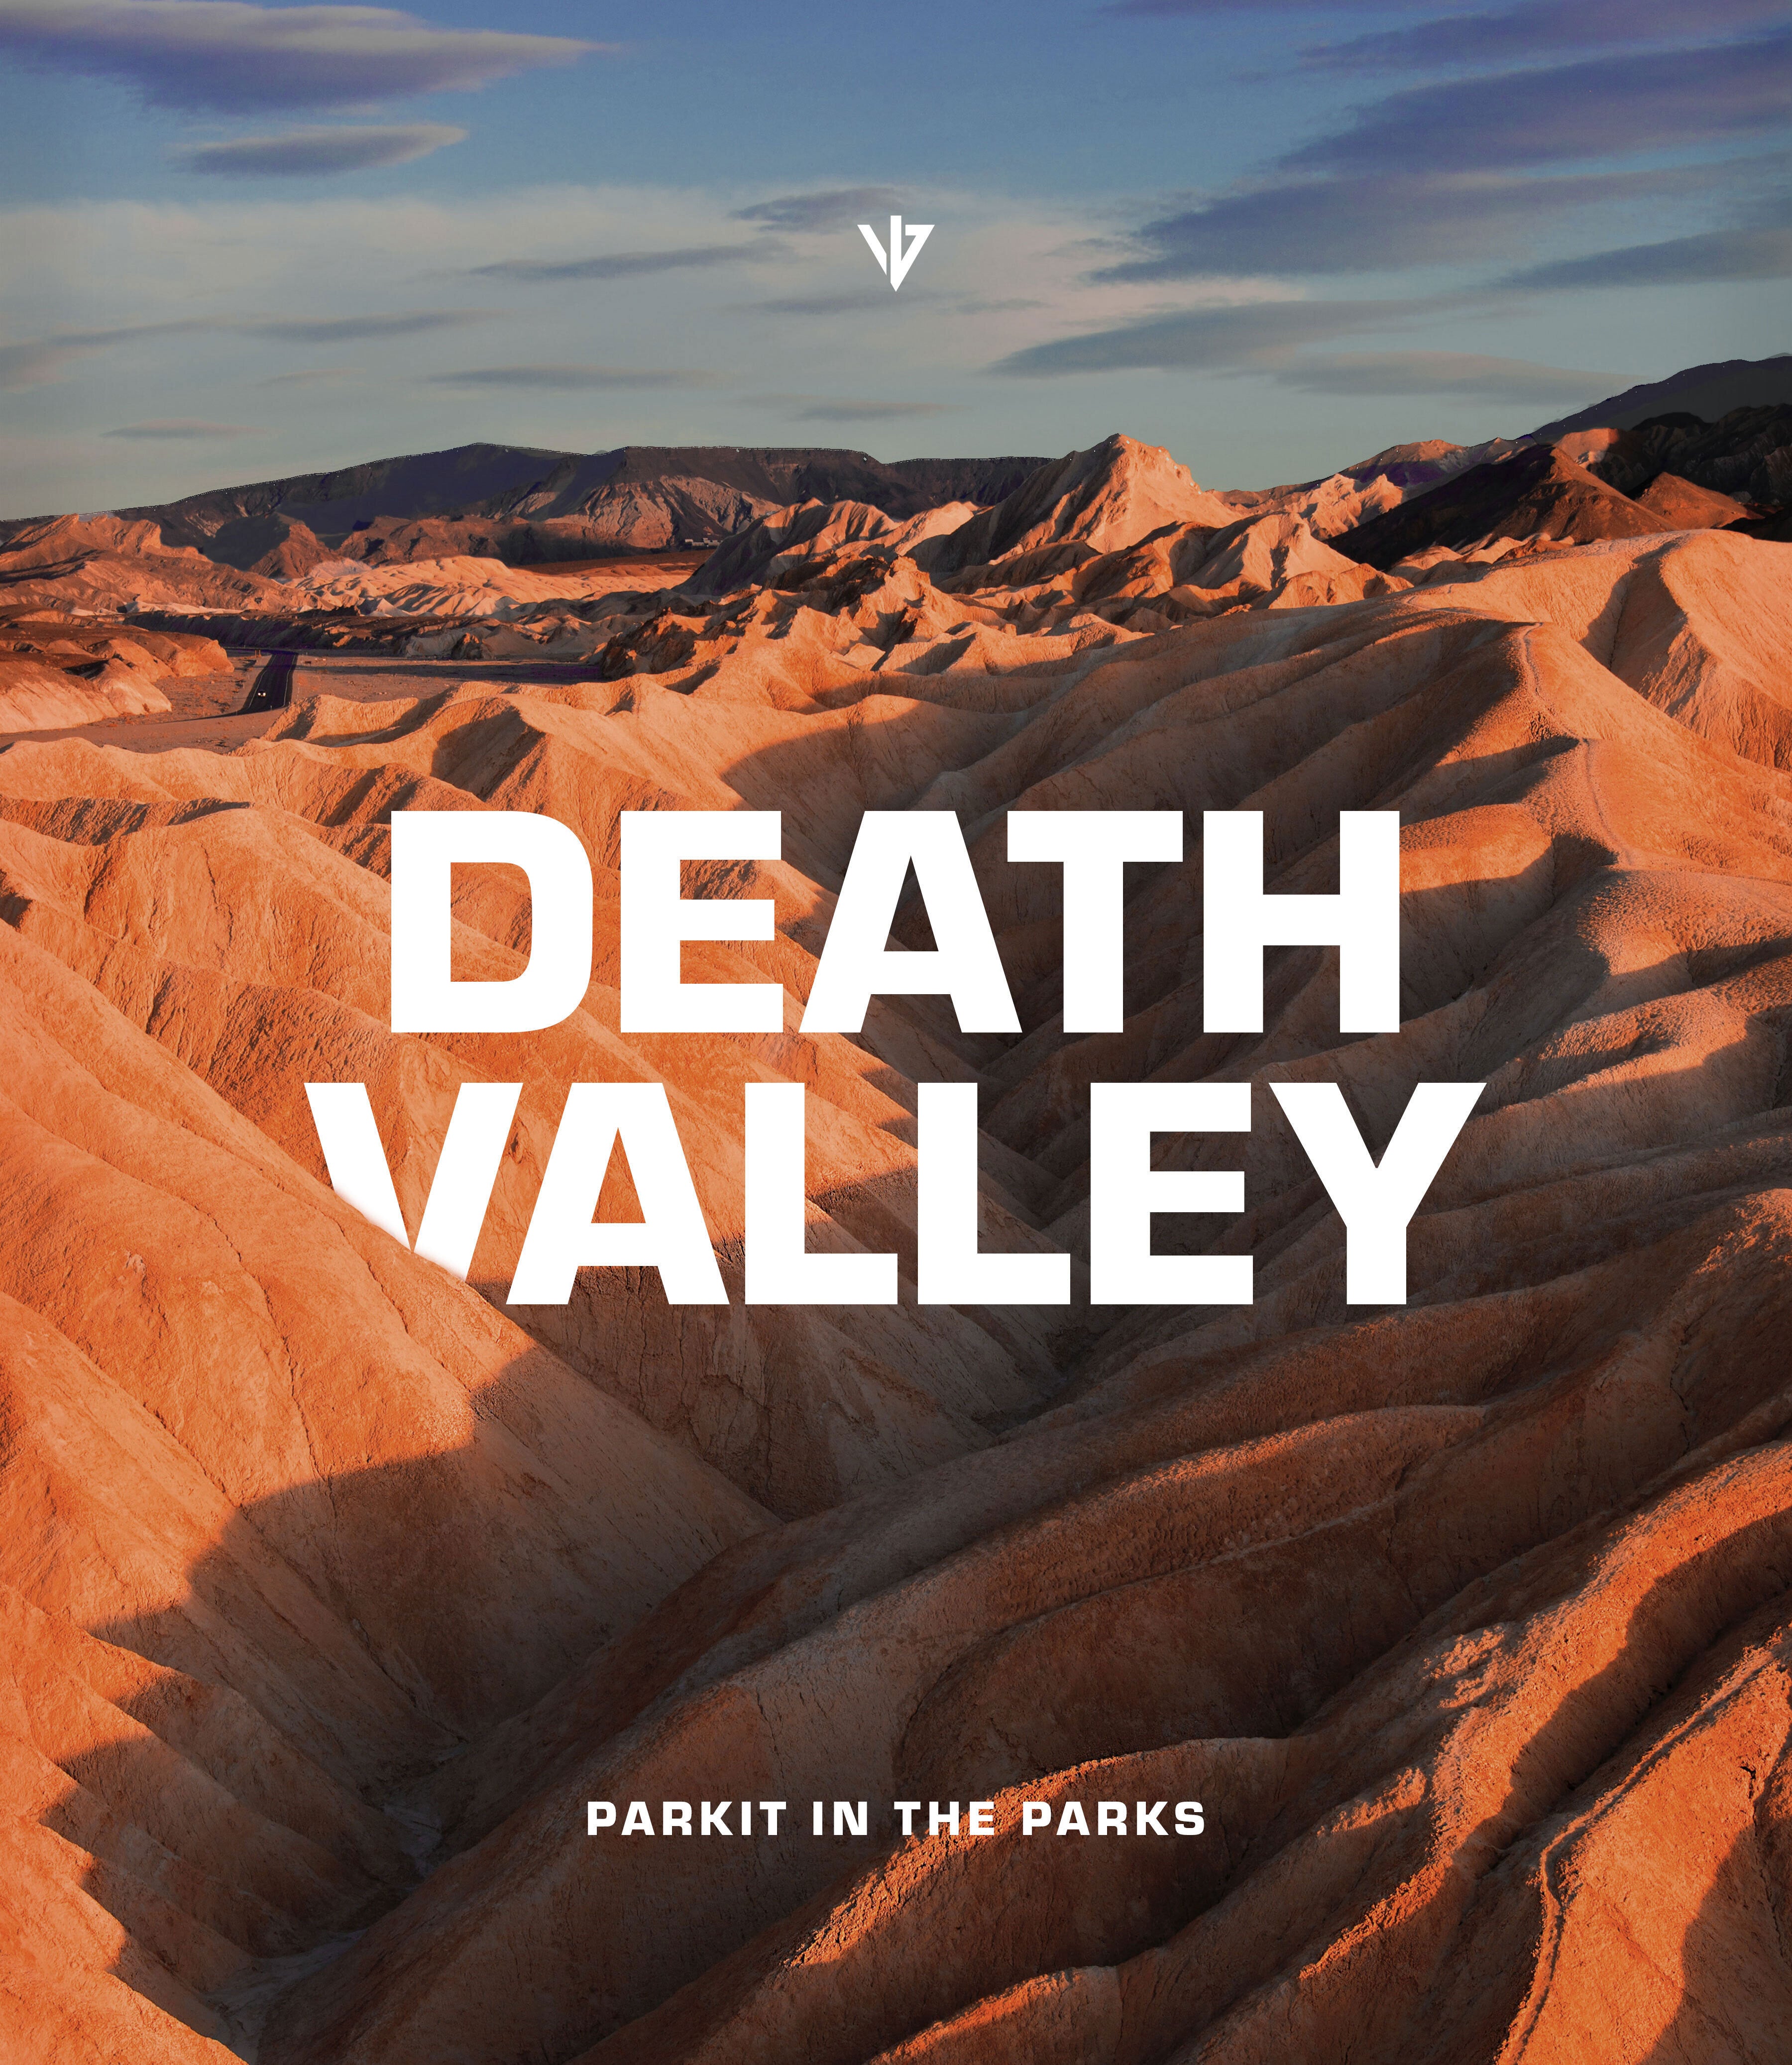 Exploring Nature's Extremes: A 2-Day Adventure in Death Valley National Park